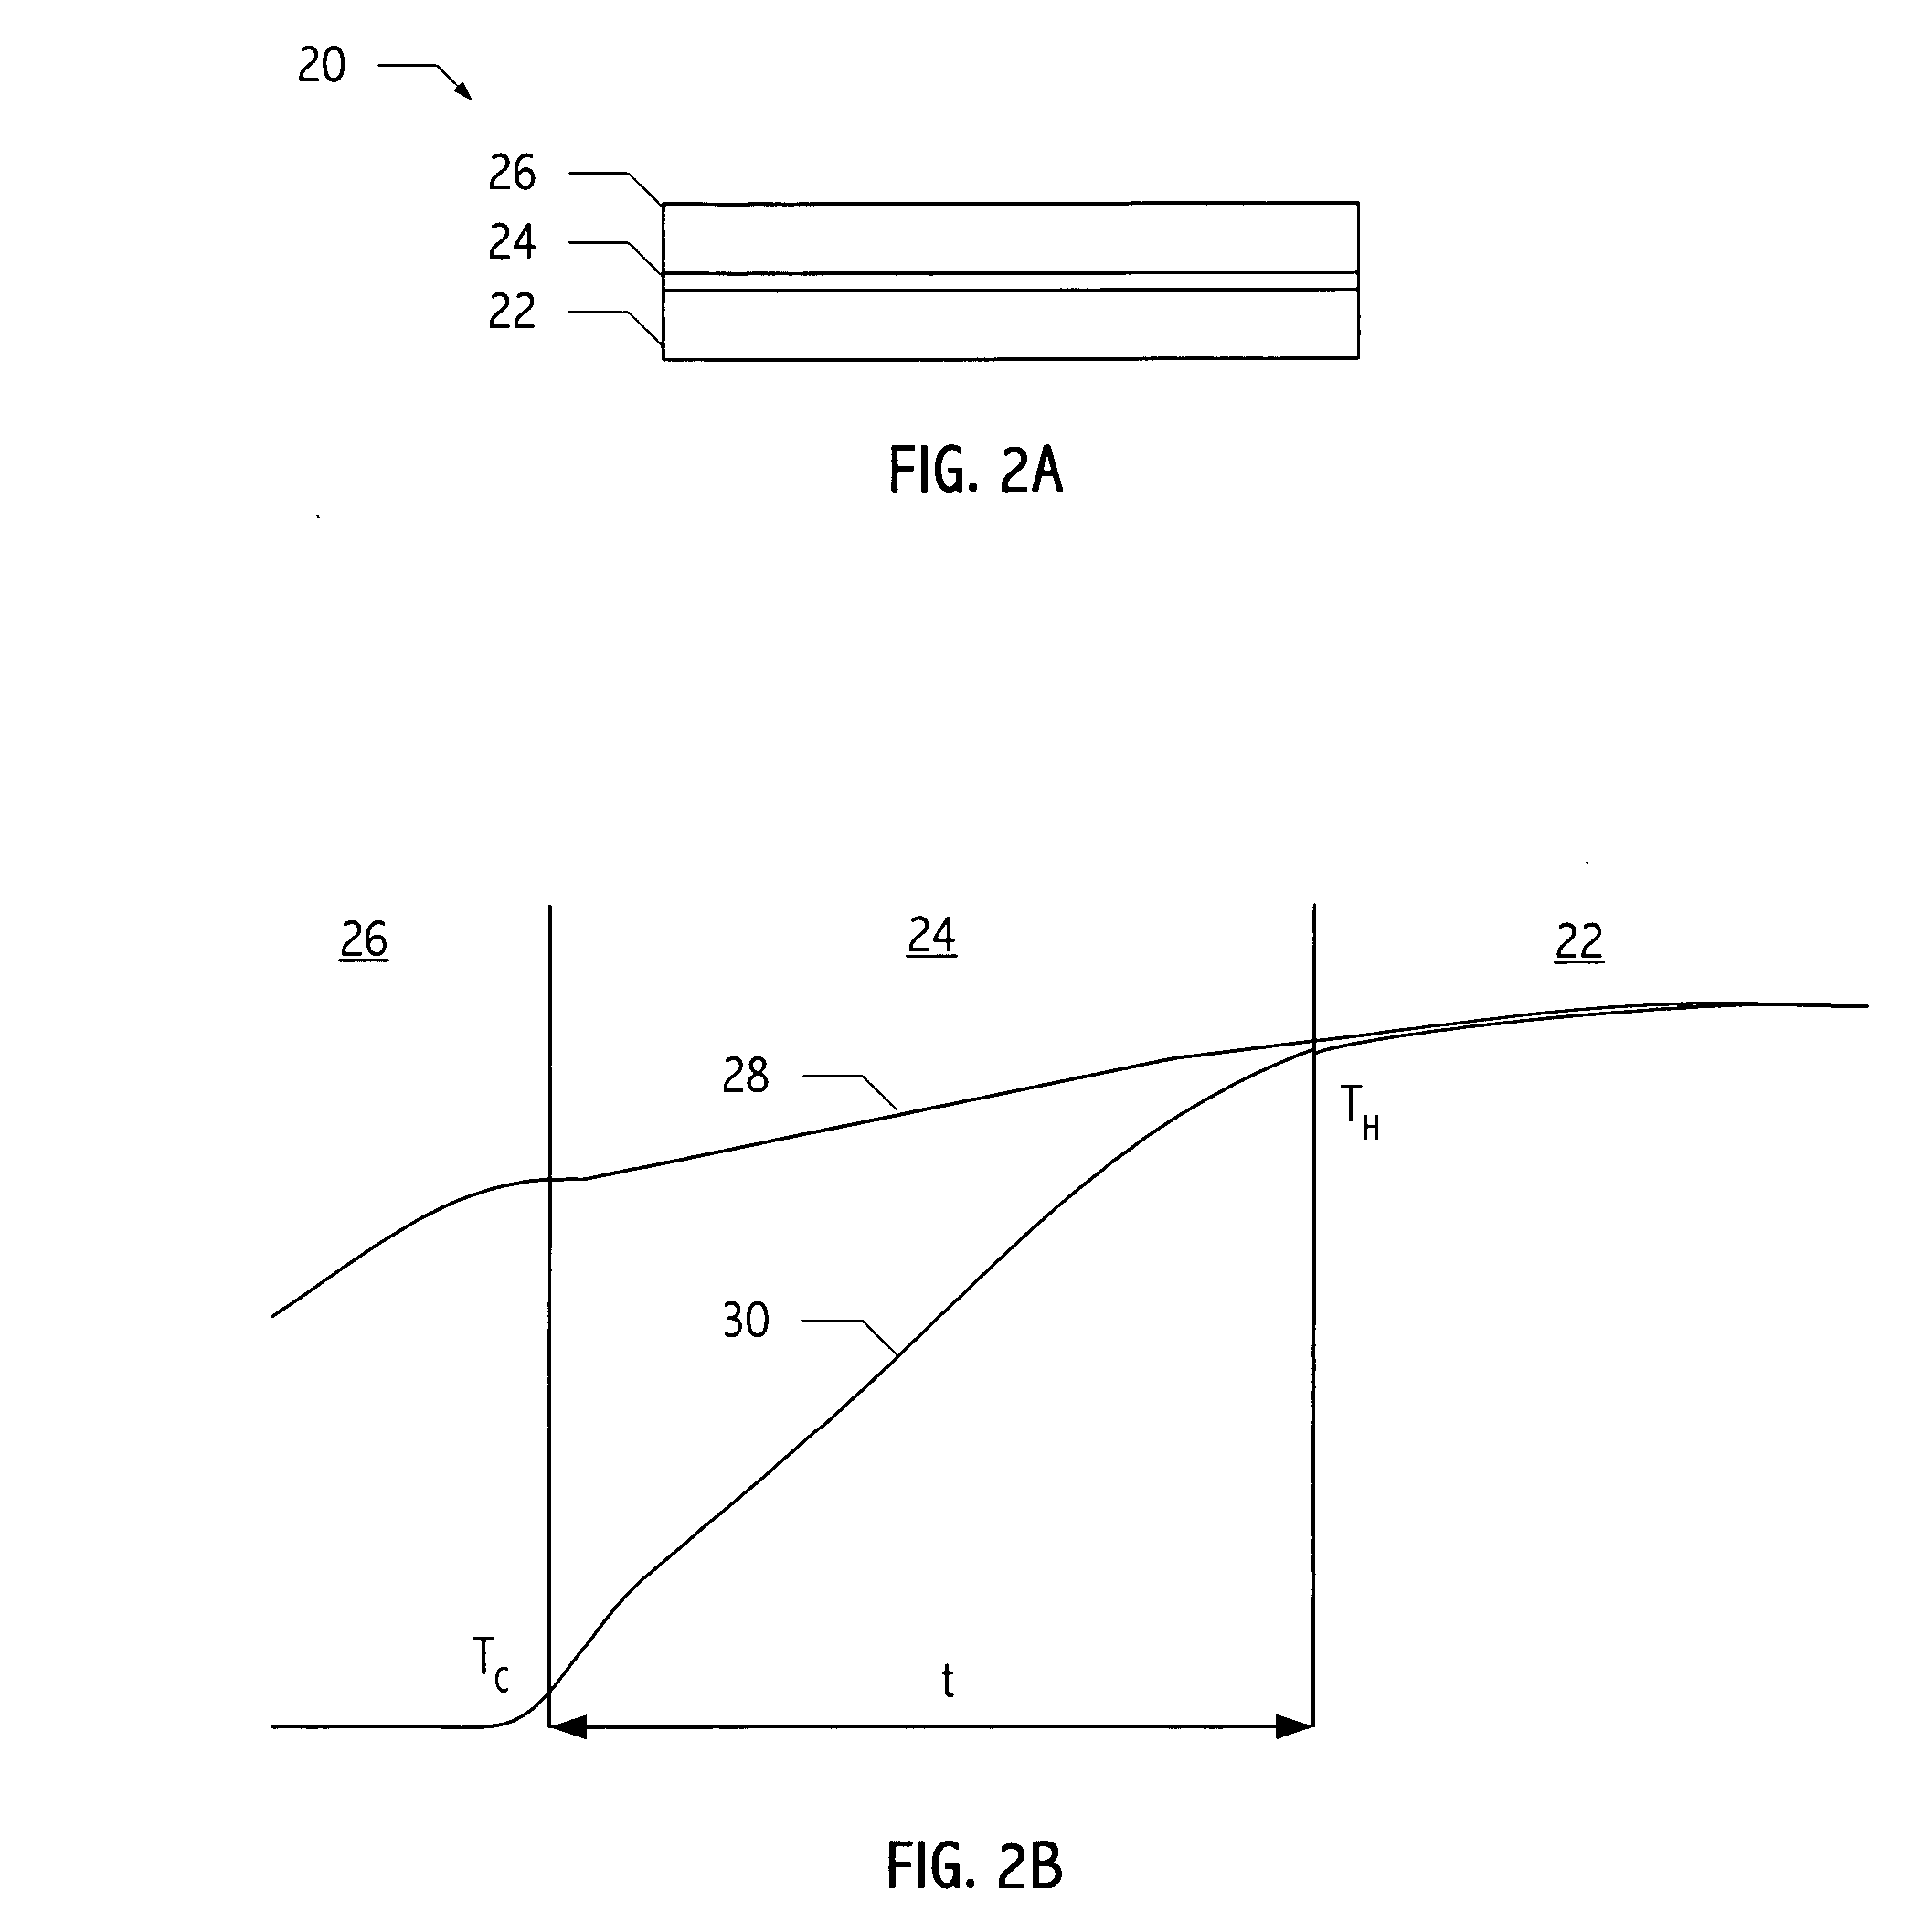 Method for forming a monolithic thin-film thermoelectric device including complementary thermoelectric materials